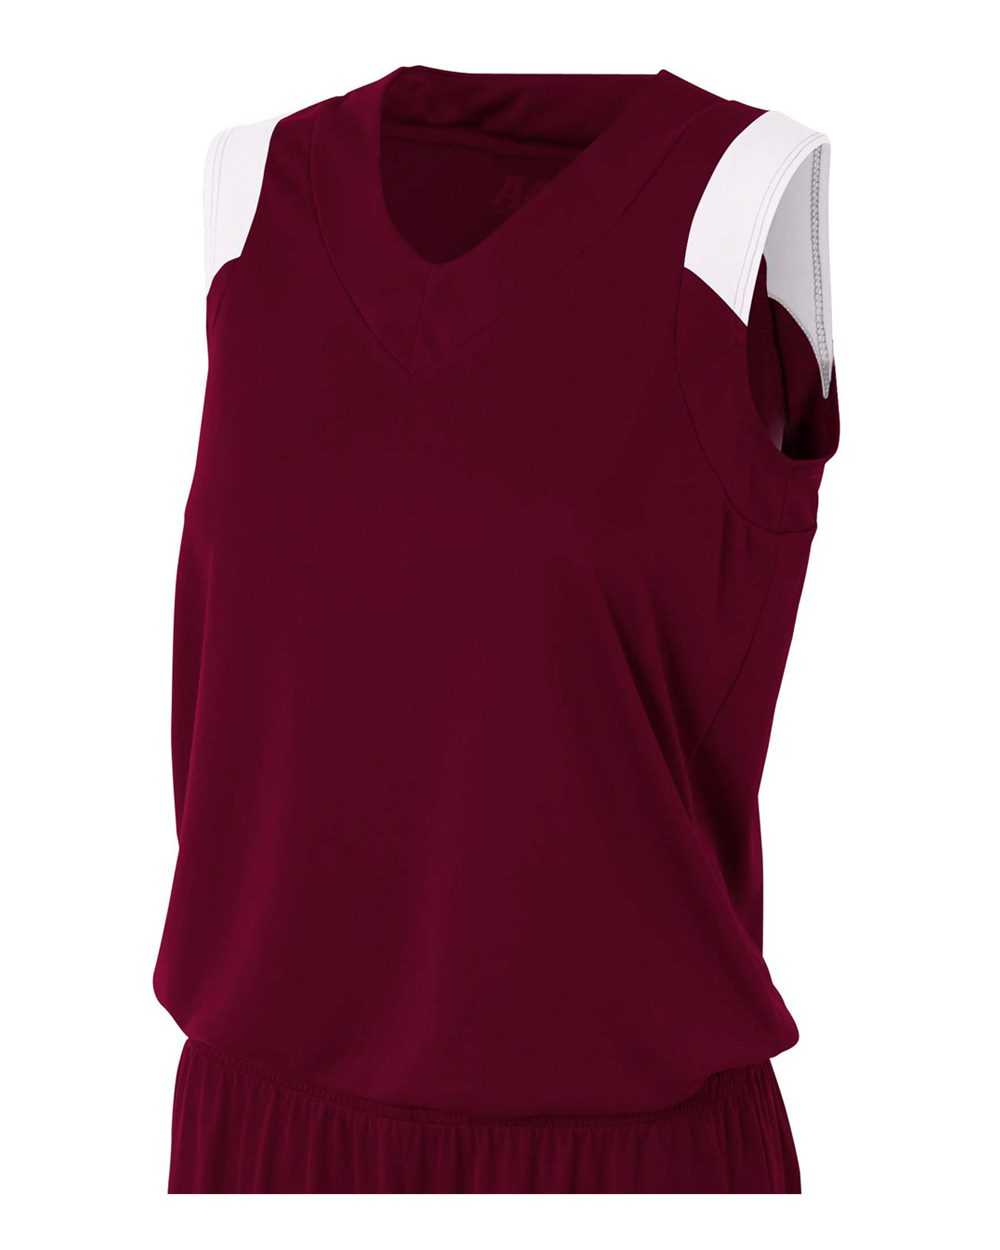 A4 NW2340 Women's Moisture Management V-Neck Muscle - Maroon White - HIT a Double